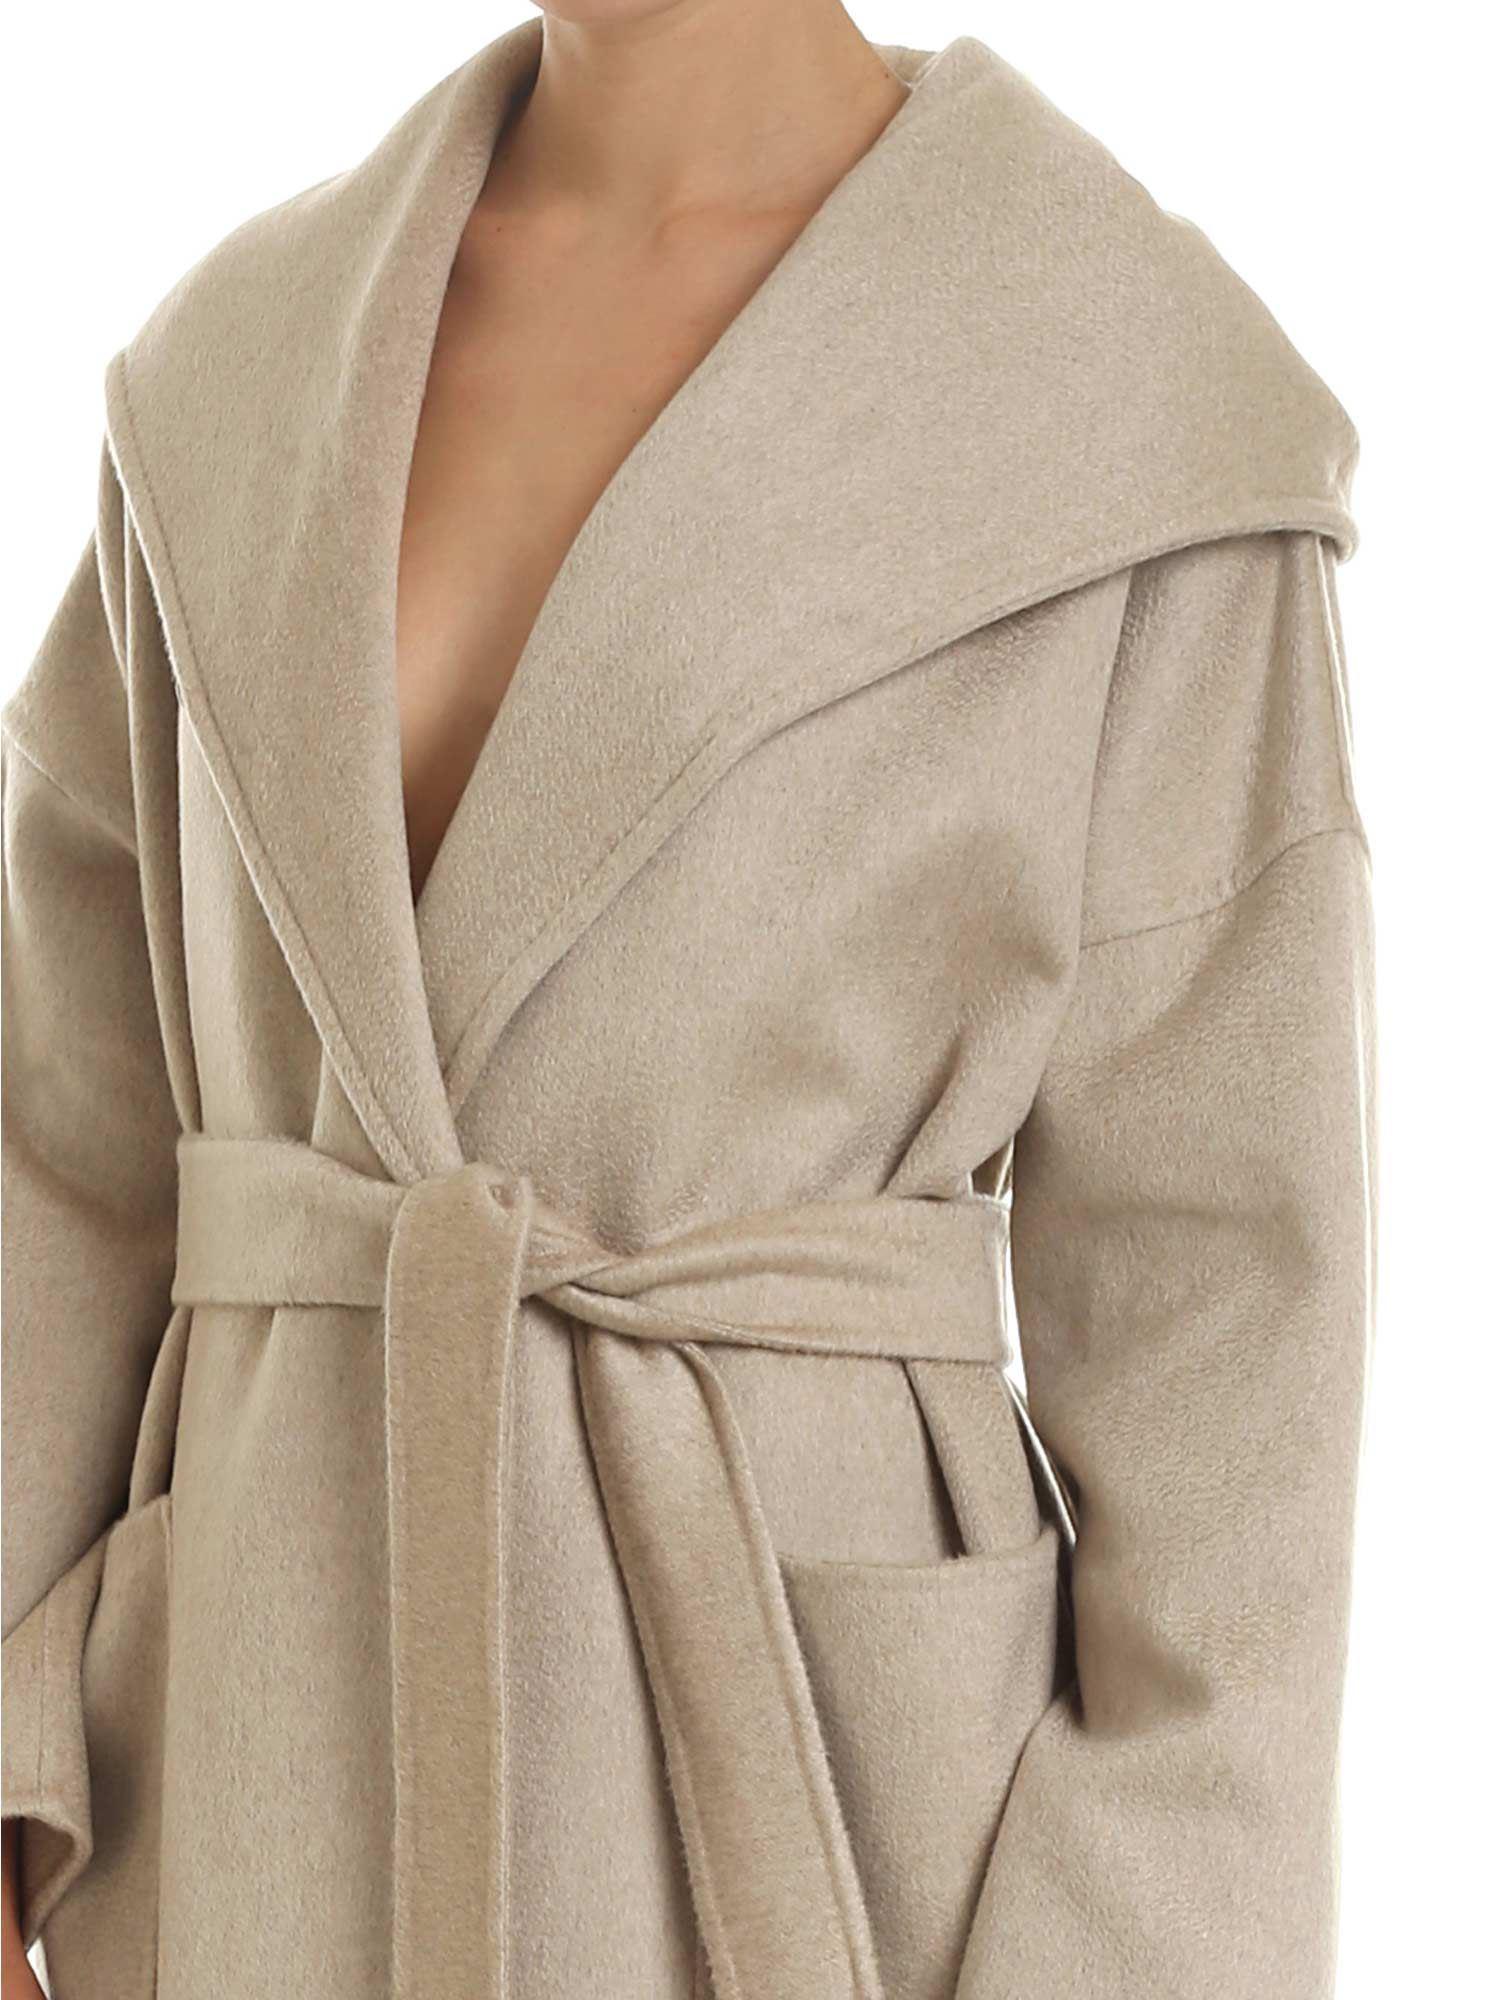 Max Mara Cashmere Marilyn Coat In Beige With Hood in Natural - Lyst